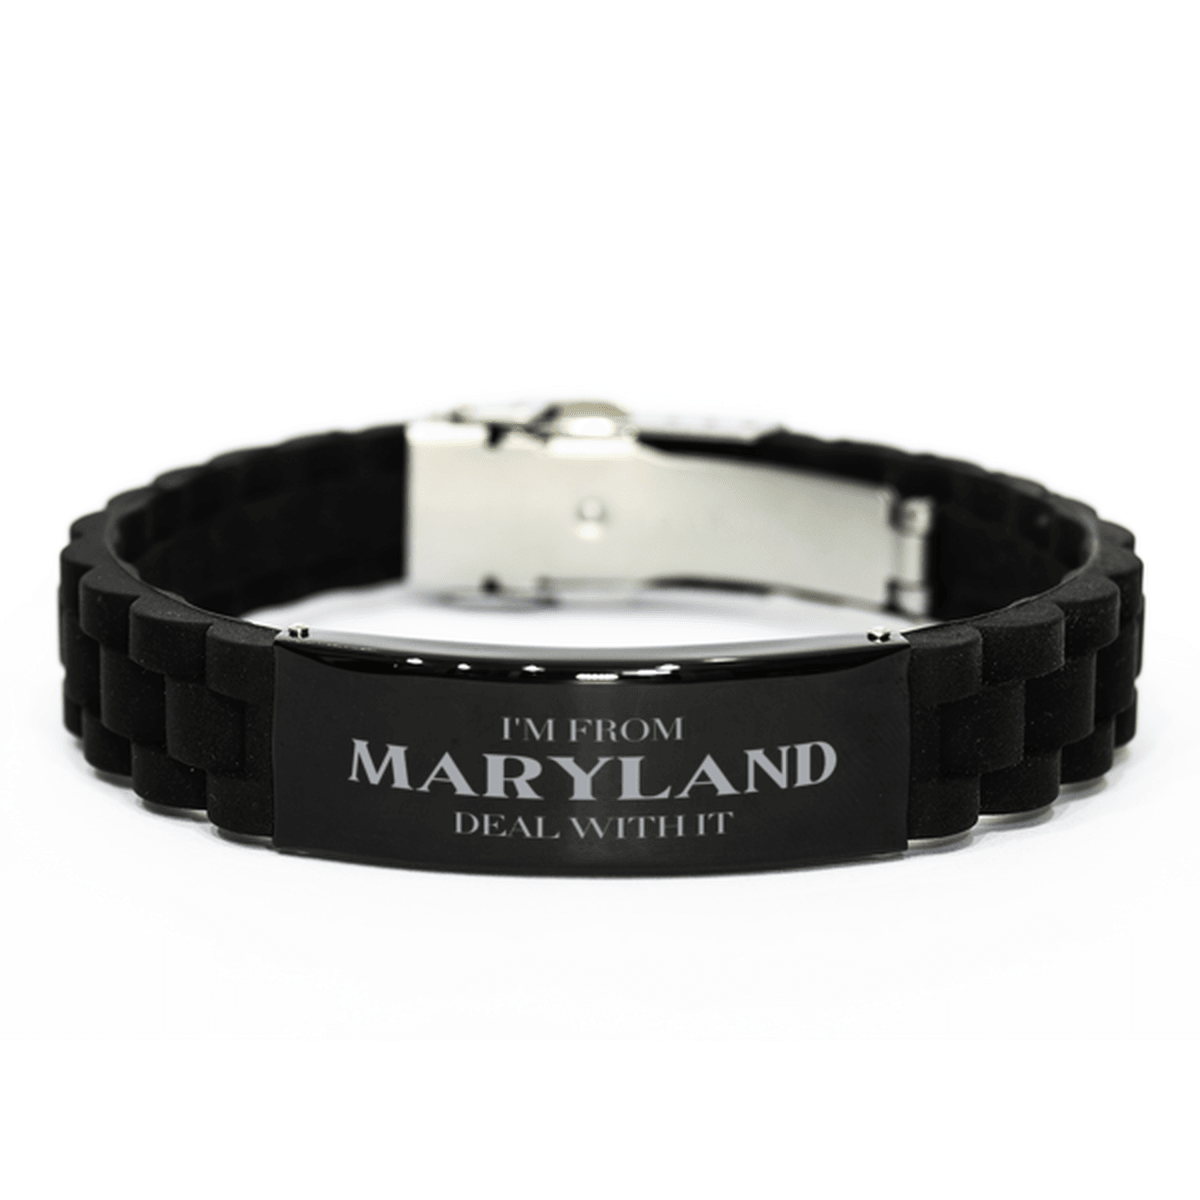 I'm from Maryland, Deal with it, Proud Maryland State Gifts, Maryland Black Glidelock Clasp Bracelet Gift Idea, Christmas Gifts for Maryland People, Coworkers, Colleague - Mallard Moon Gift Shop